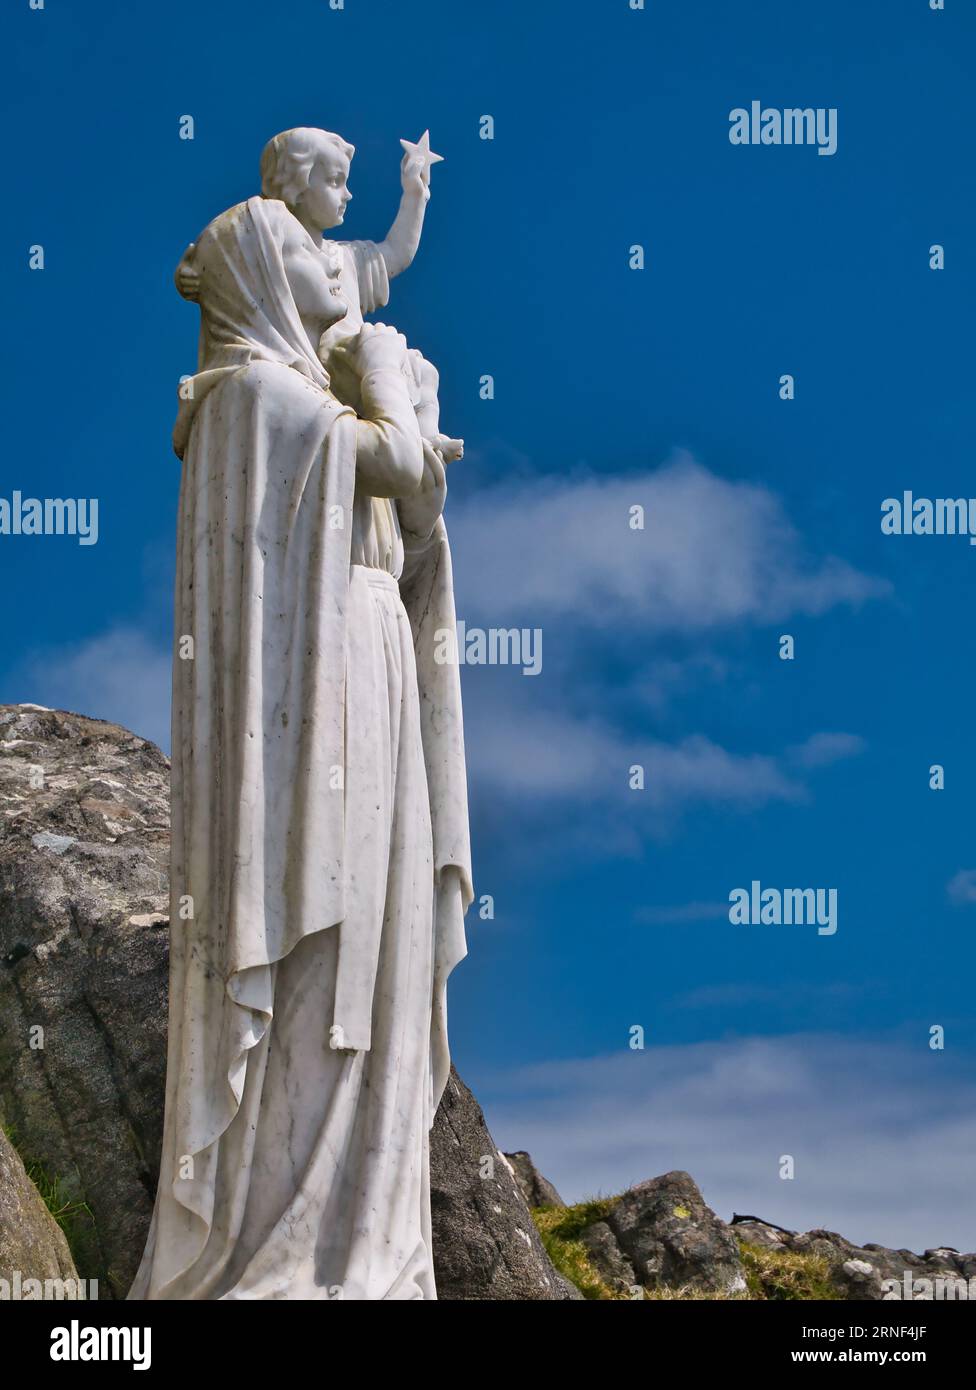 Statue of and photography stock - Alamy the hi-res sea of our images lady